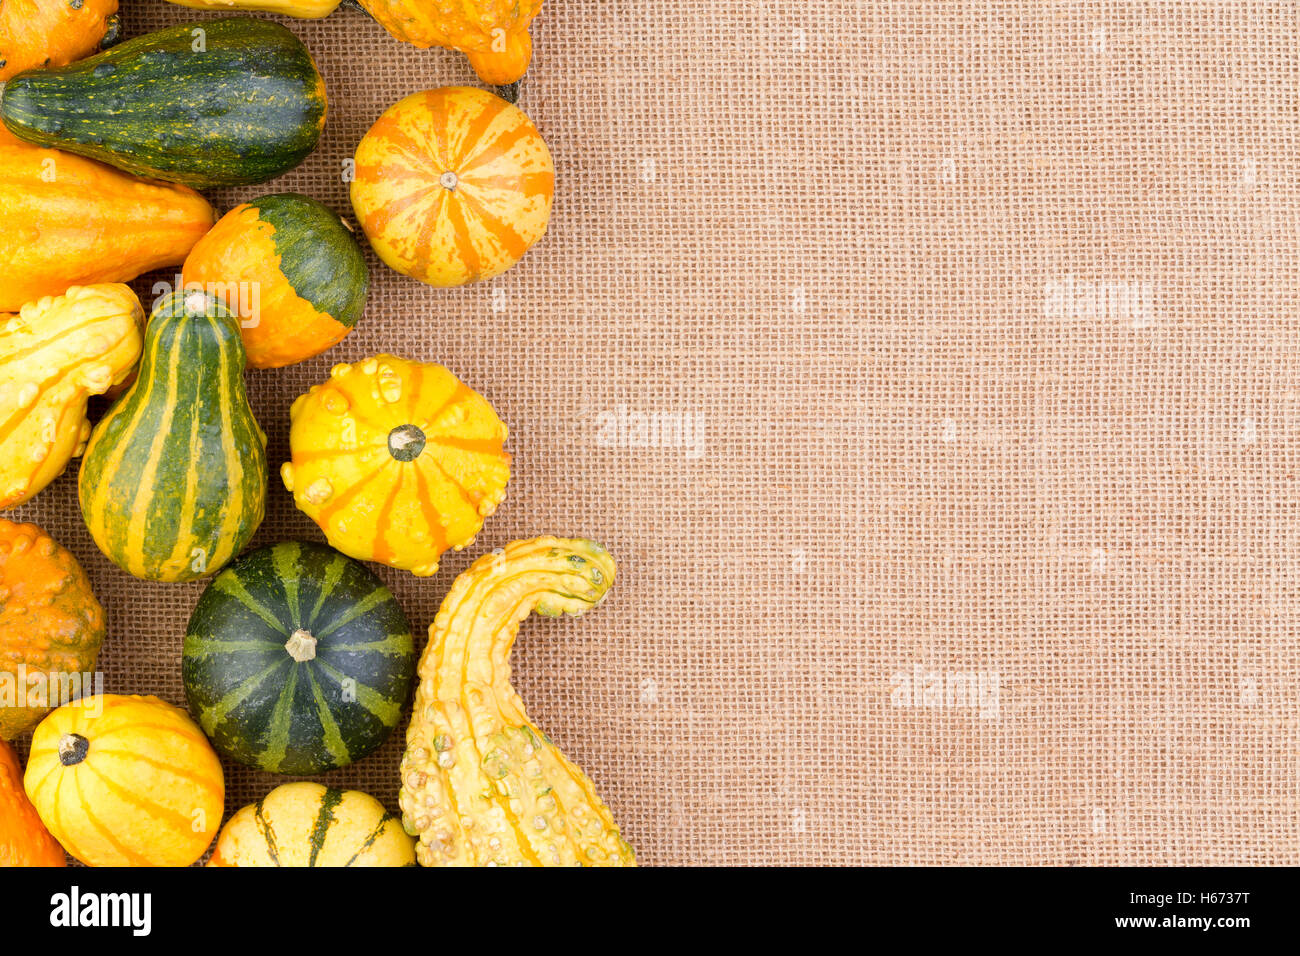 Side border of ornamental autumn gourds over a burlap textured textile with copy space for your Thanksgiving message Stock Photo